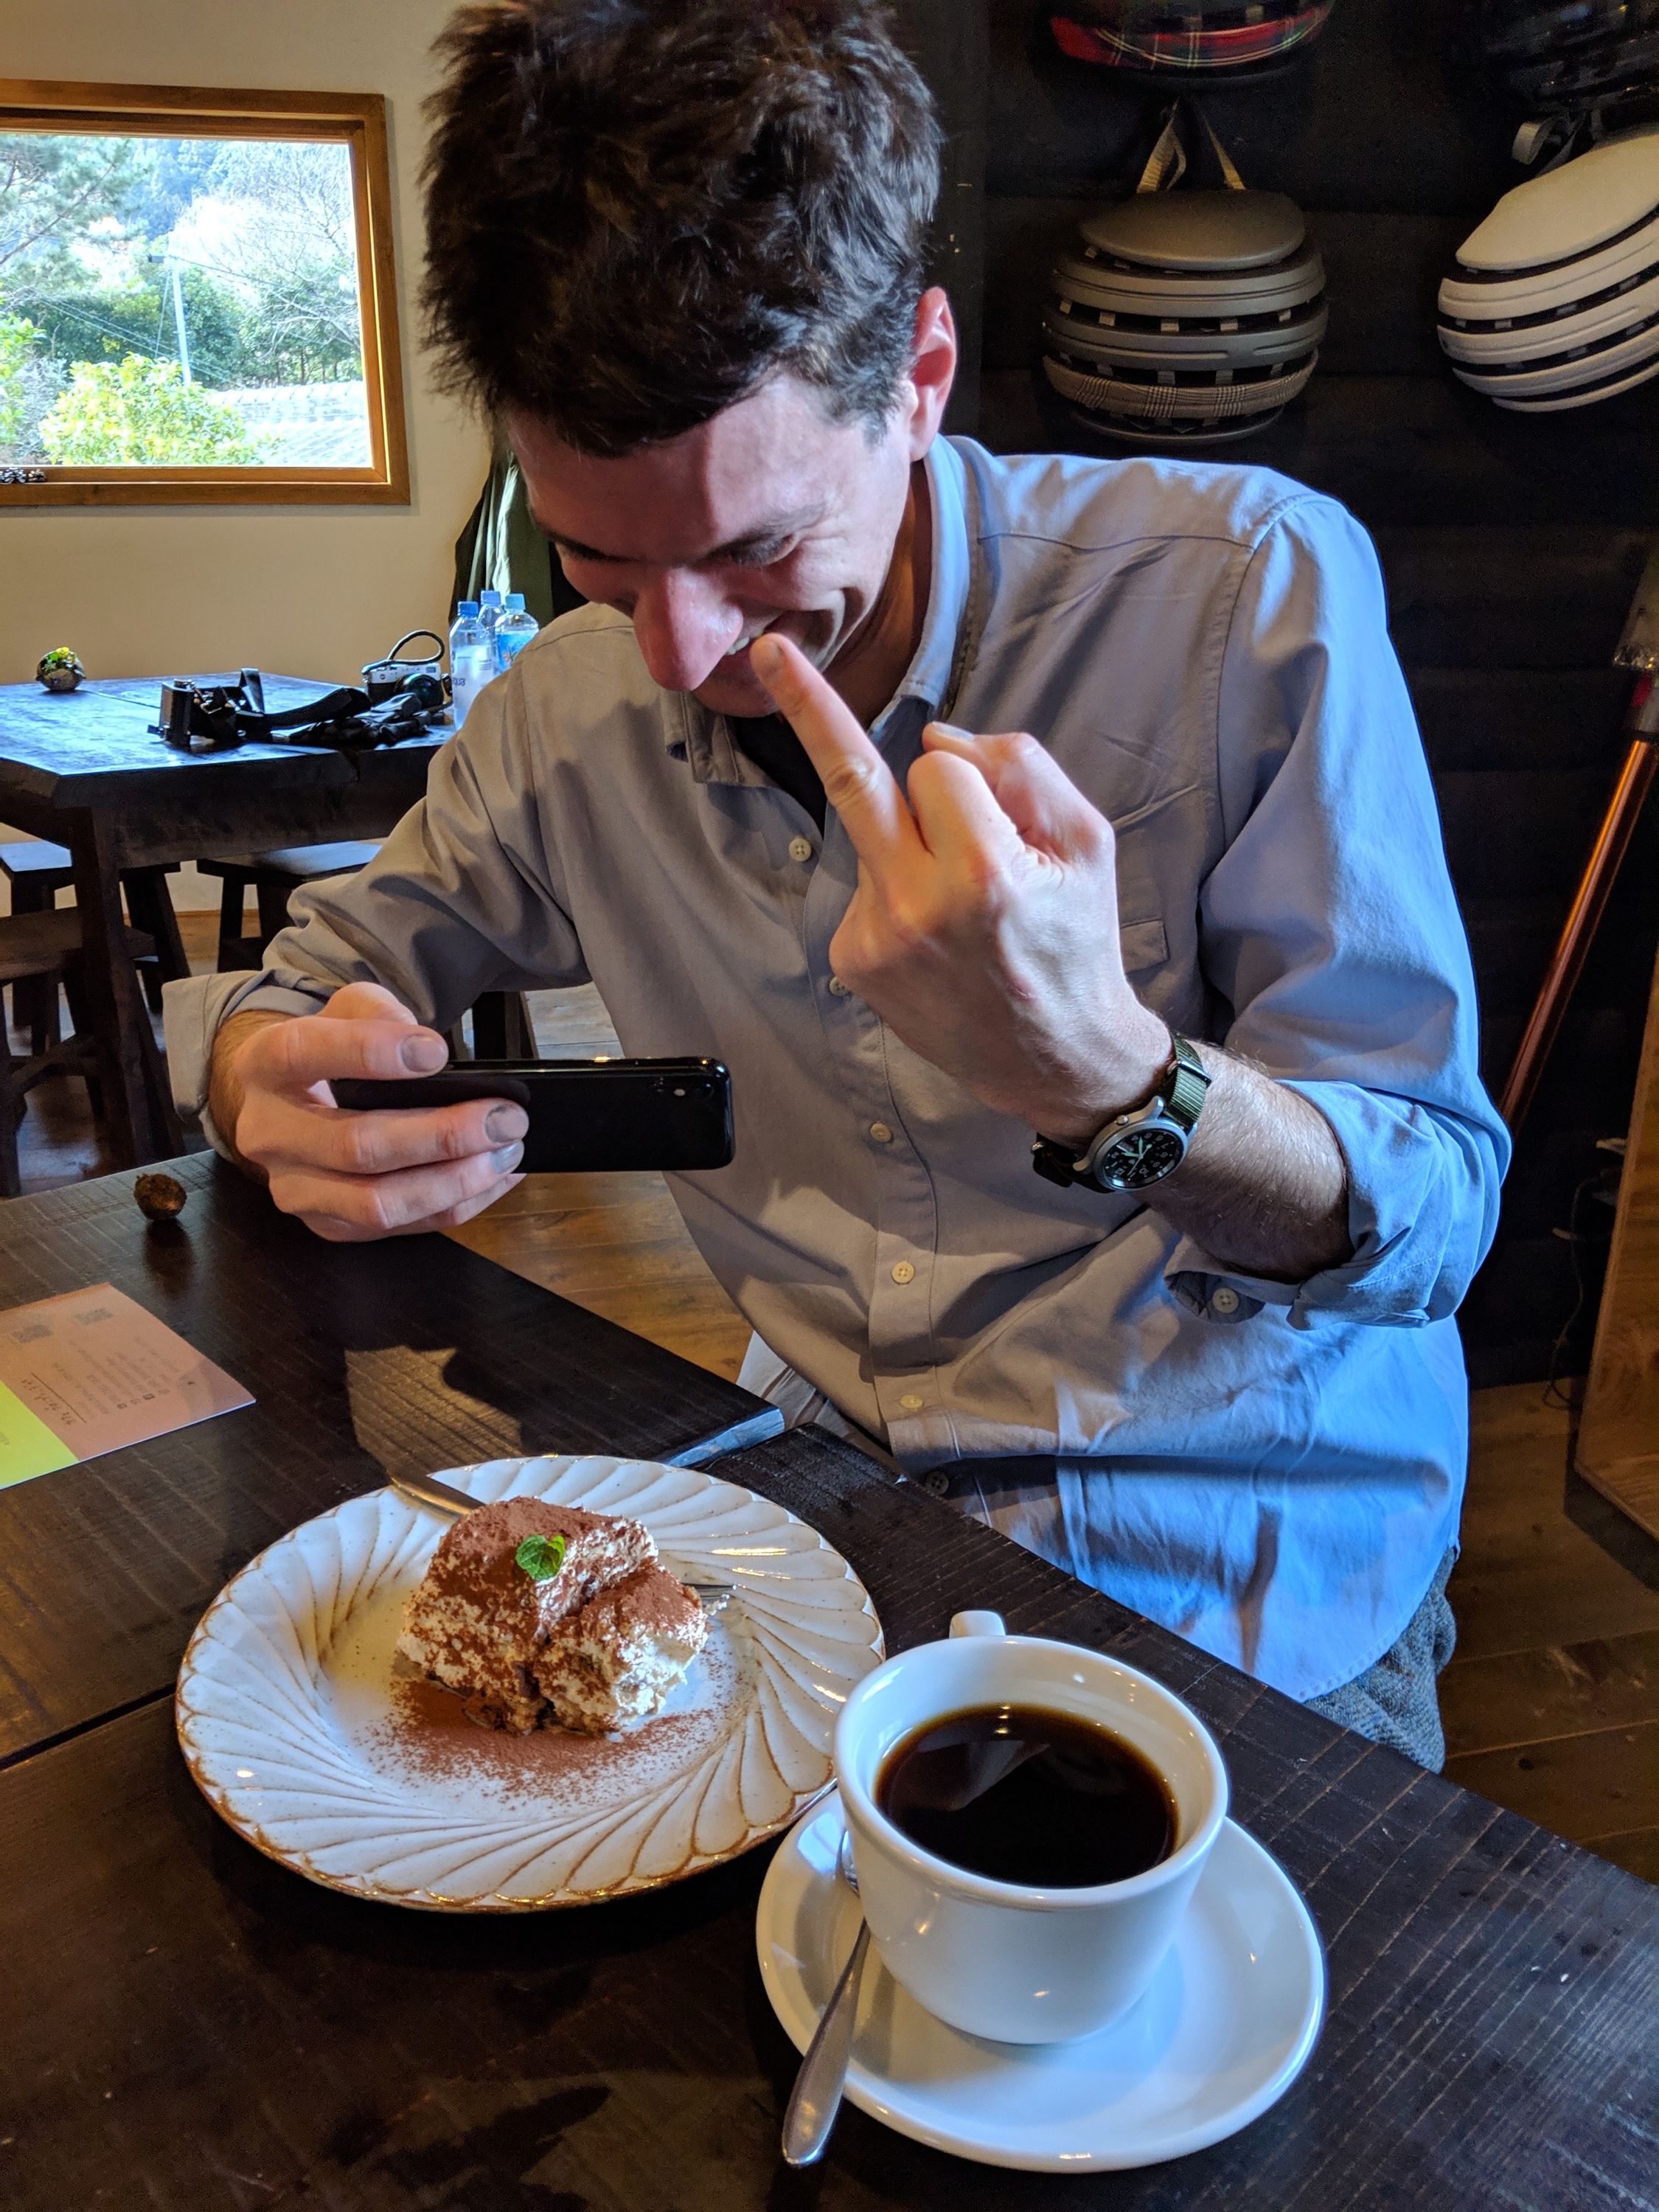 A man in a blue oxford shirt, the author, takes a photo of the cake with his cell phone while giving the finger to someone, presumably the photographer.